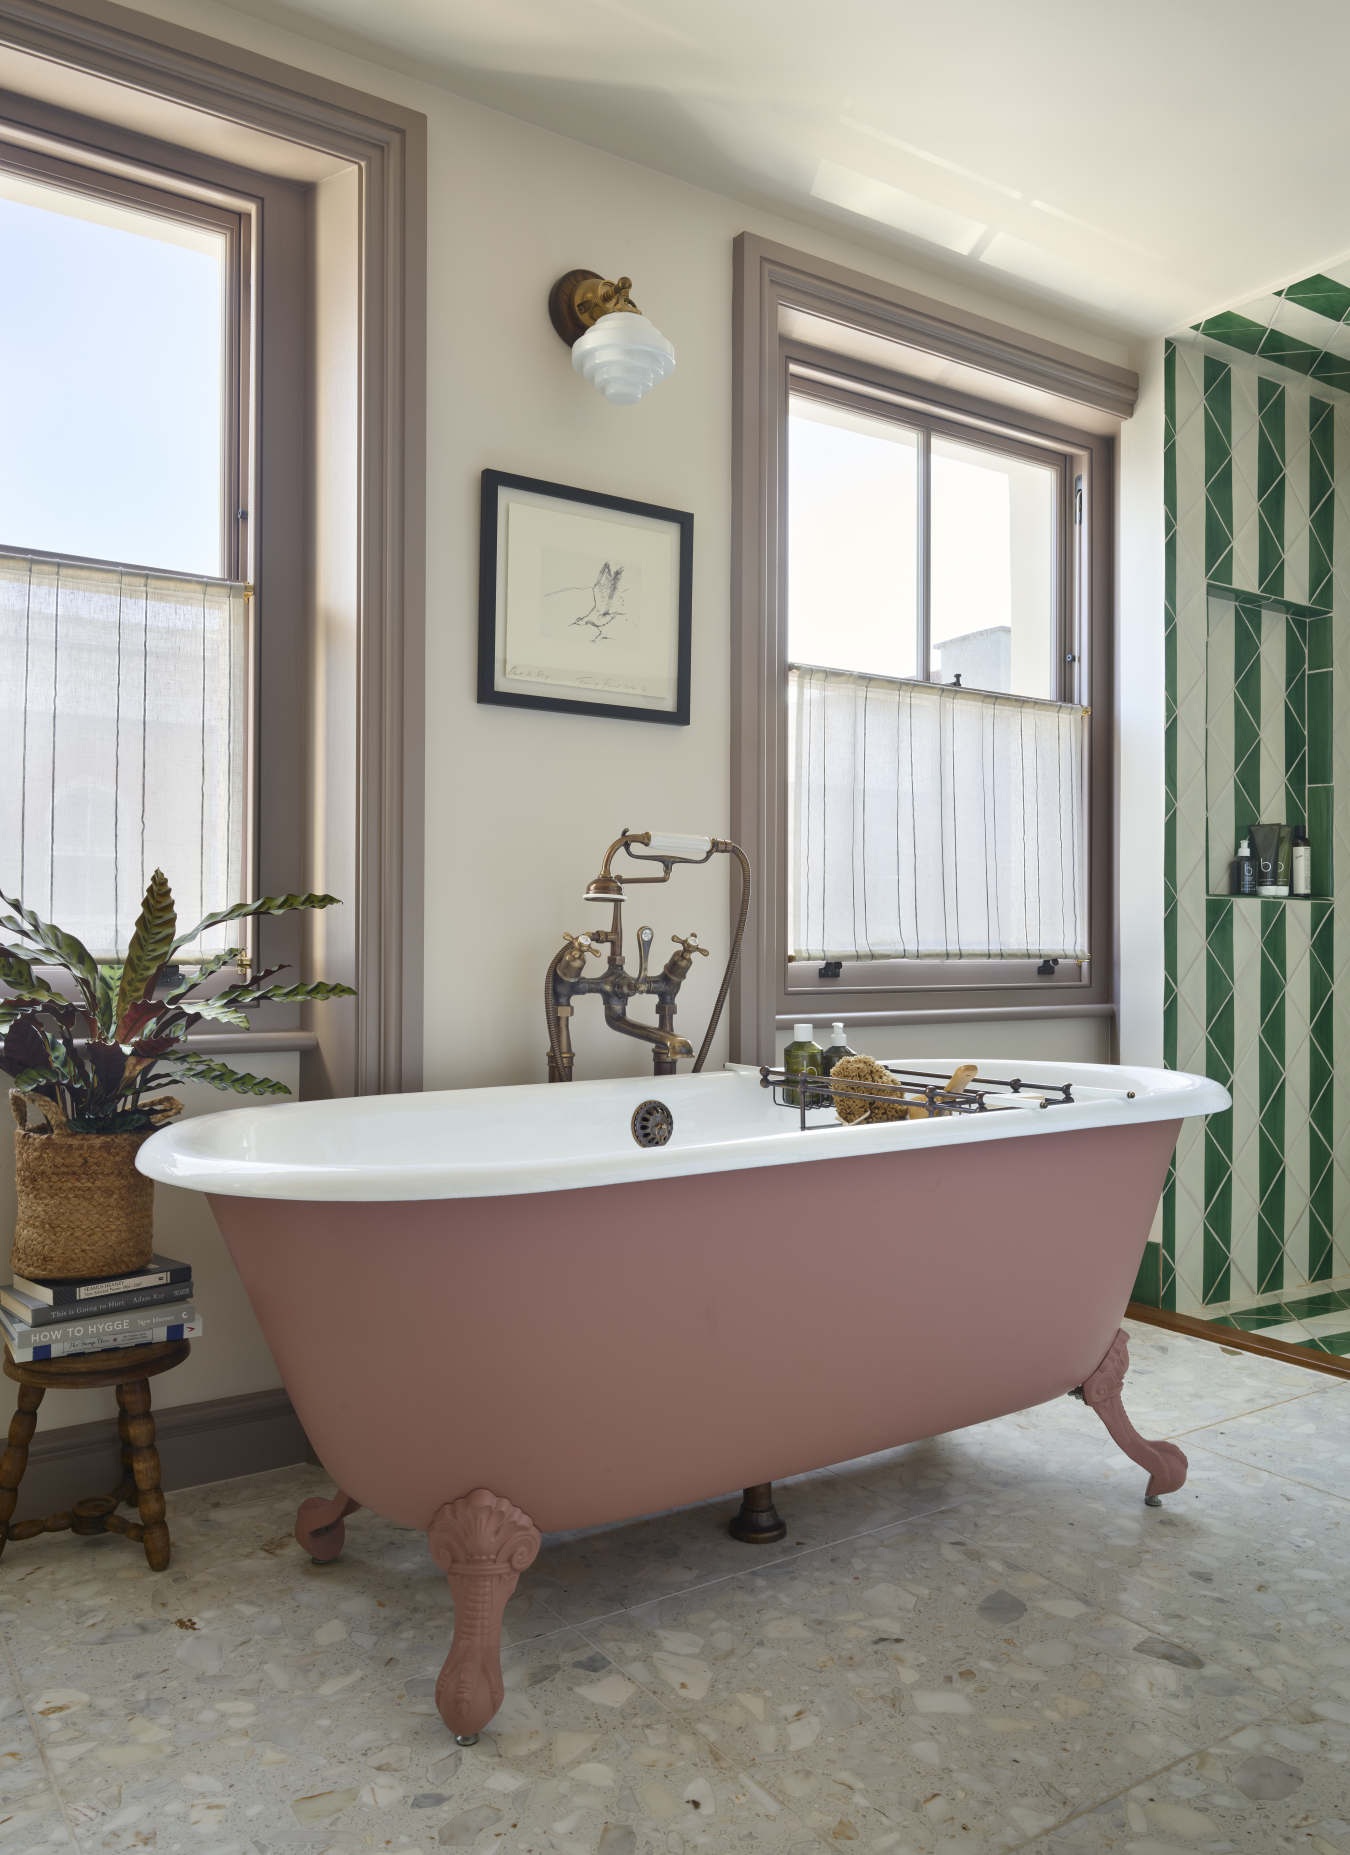 The Swale Cast Iron Roll Top Bath Tub With Feet - Drummonds Bathrooms